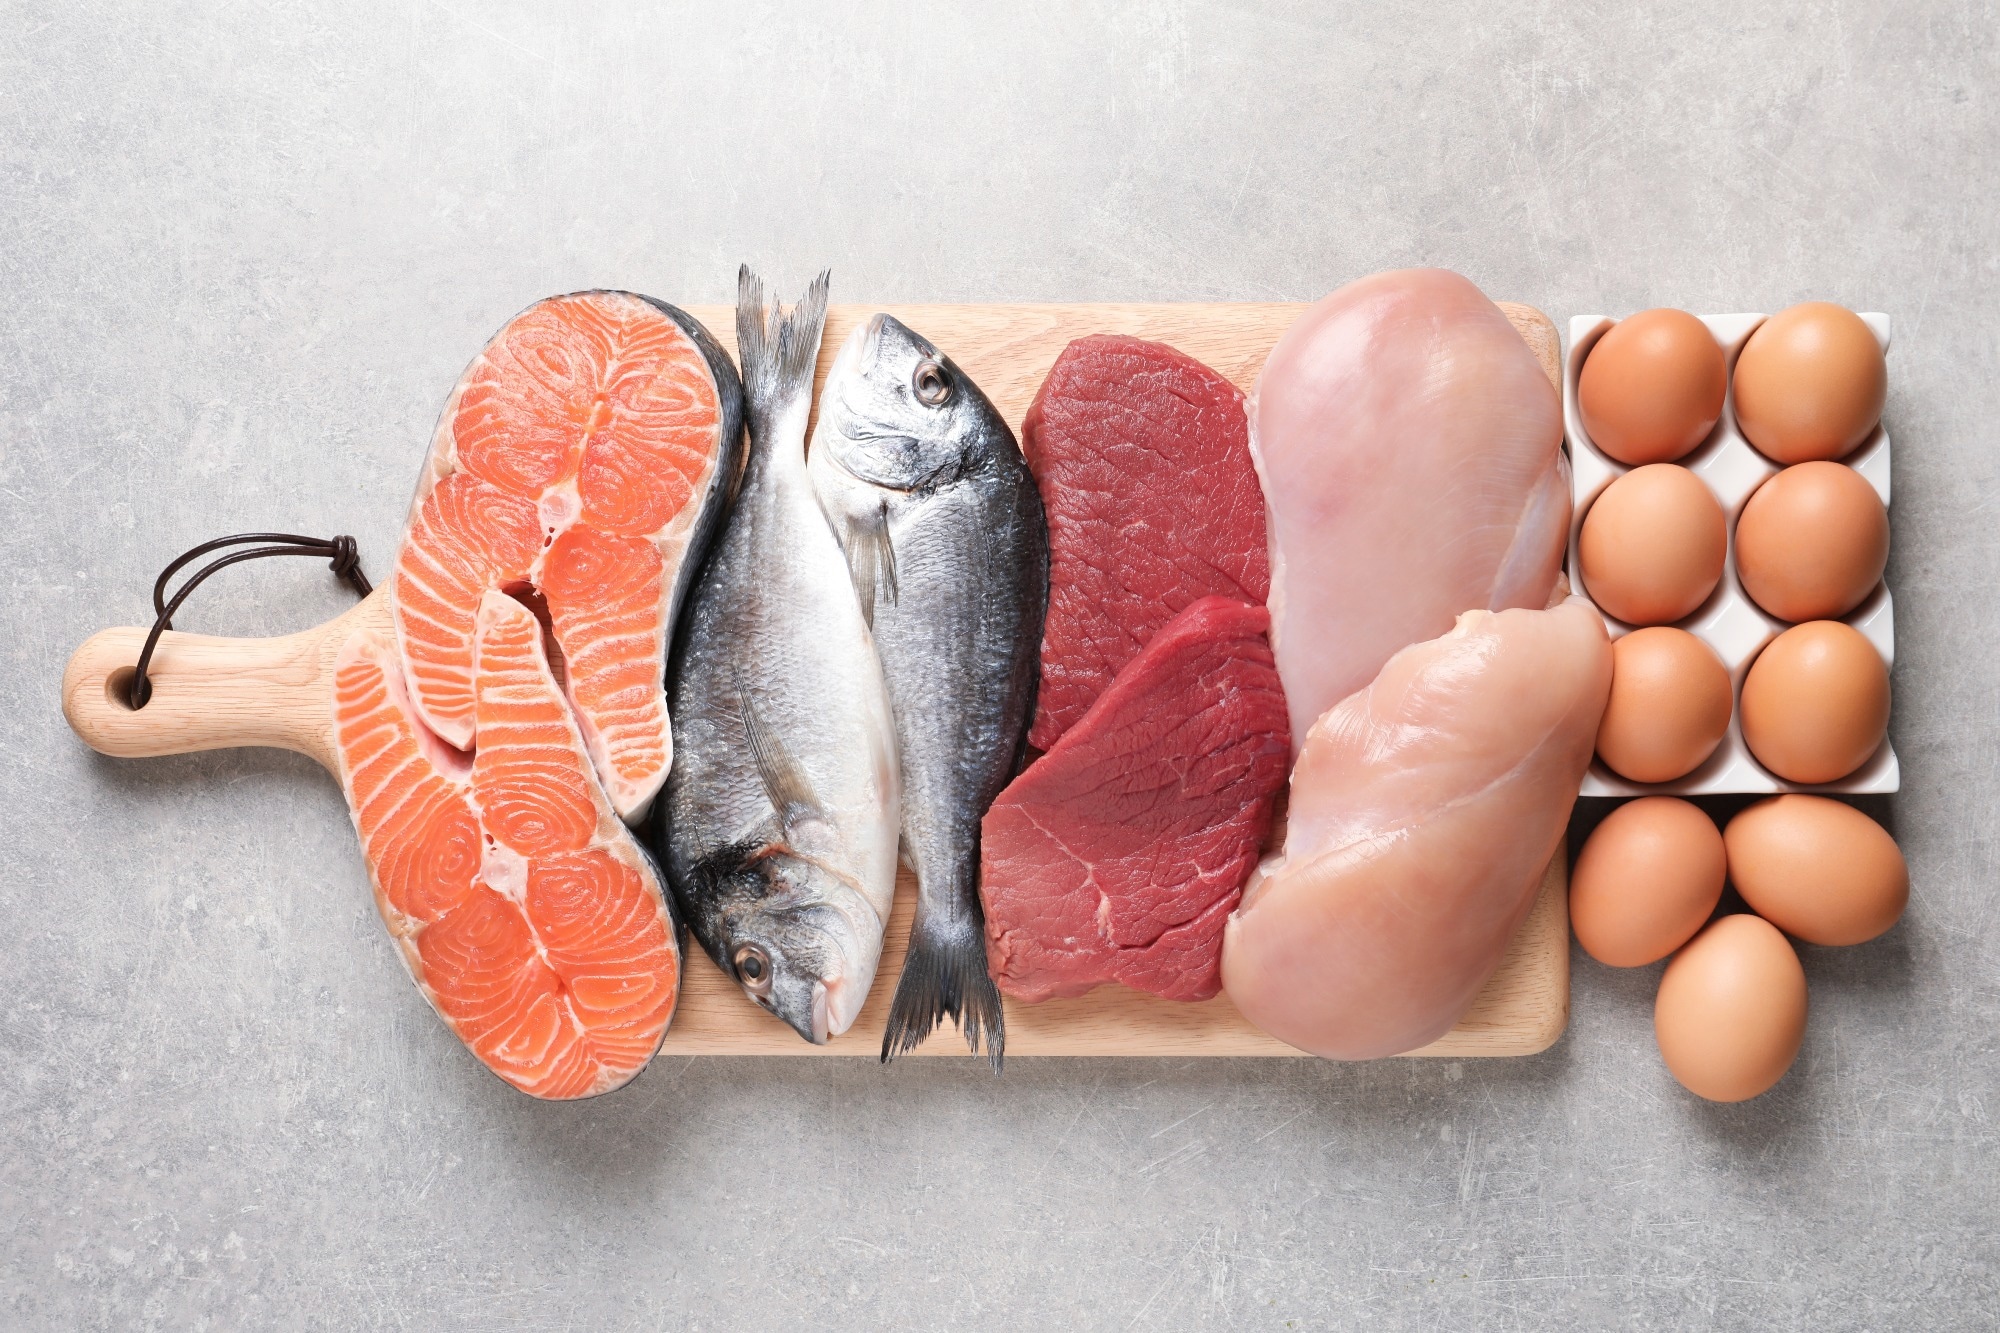 Study: Association of fish and meat consumption with non-alcoholic fatty liver disease: Guangzhou Biobank Cohort Study. Image Credit: New Africa/Shutterstock.com